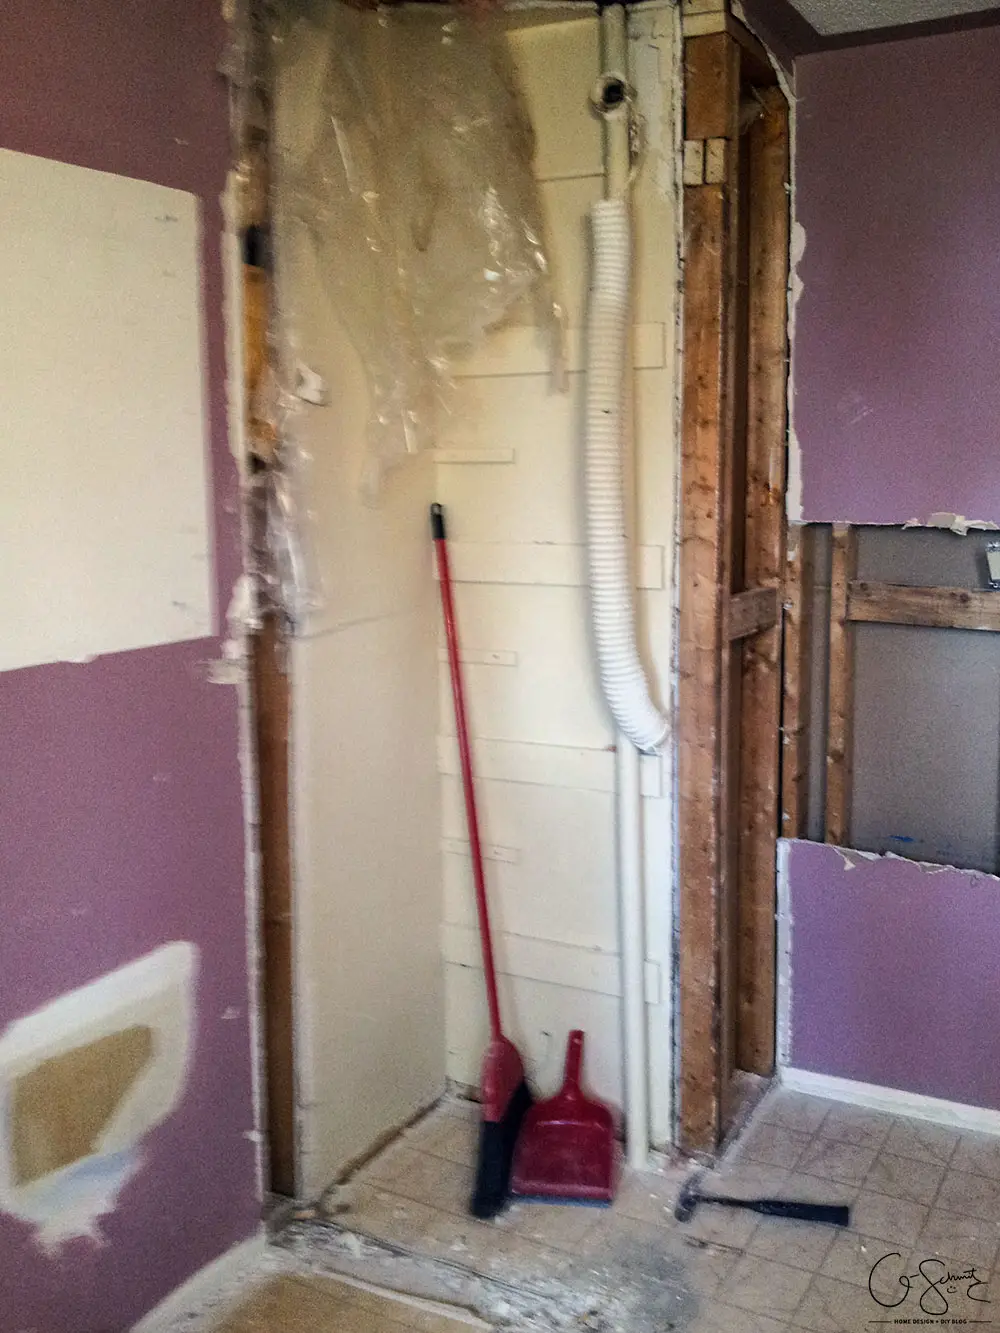 Here are the before pictures of our main DIY bathroom renovation... complete with pink walls, enclosed toilet niche and a full/drywall linen closet!